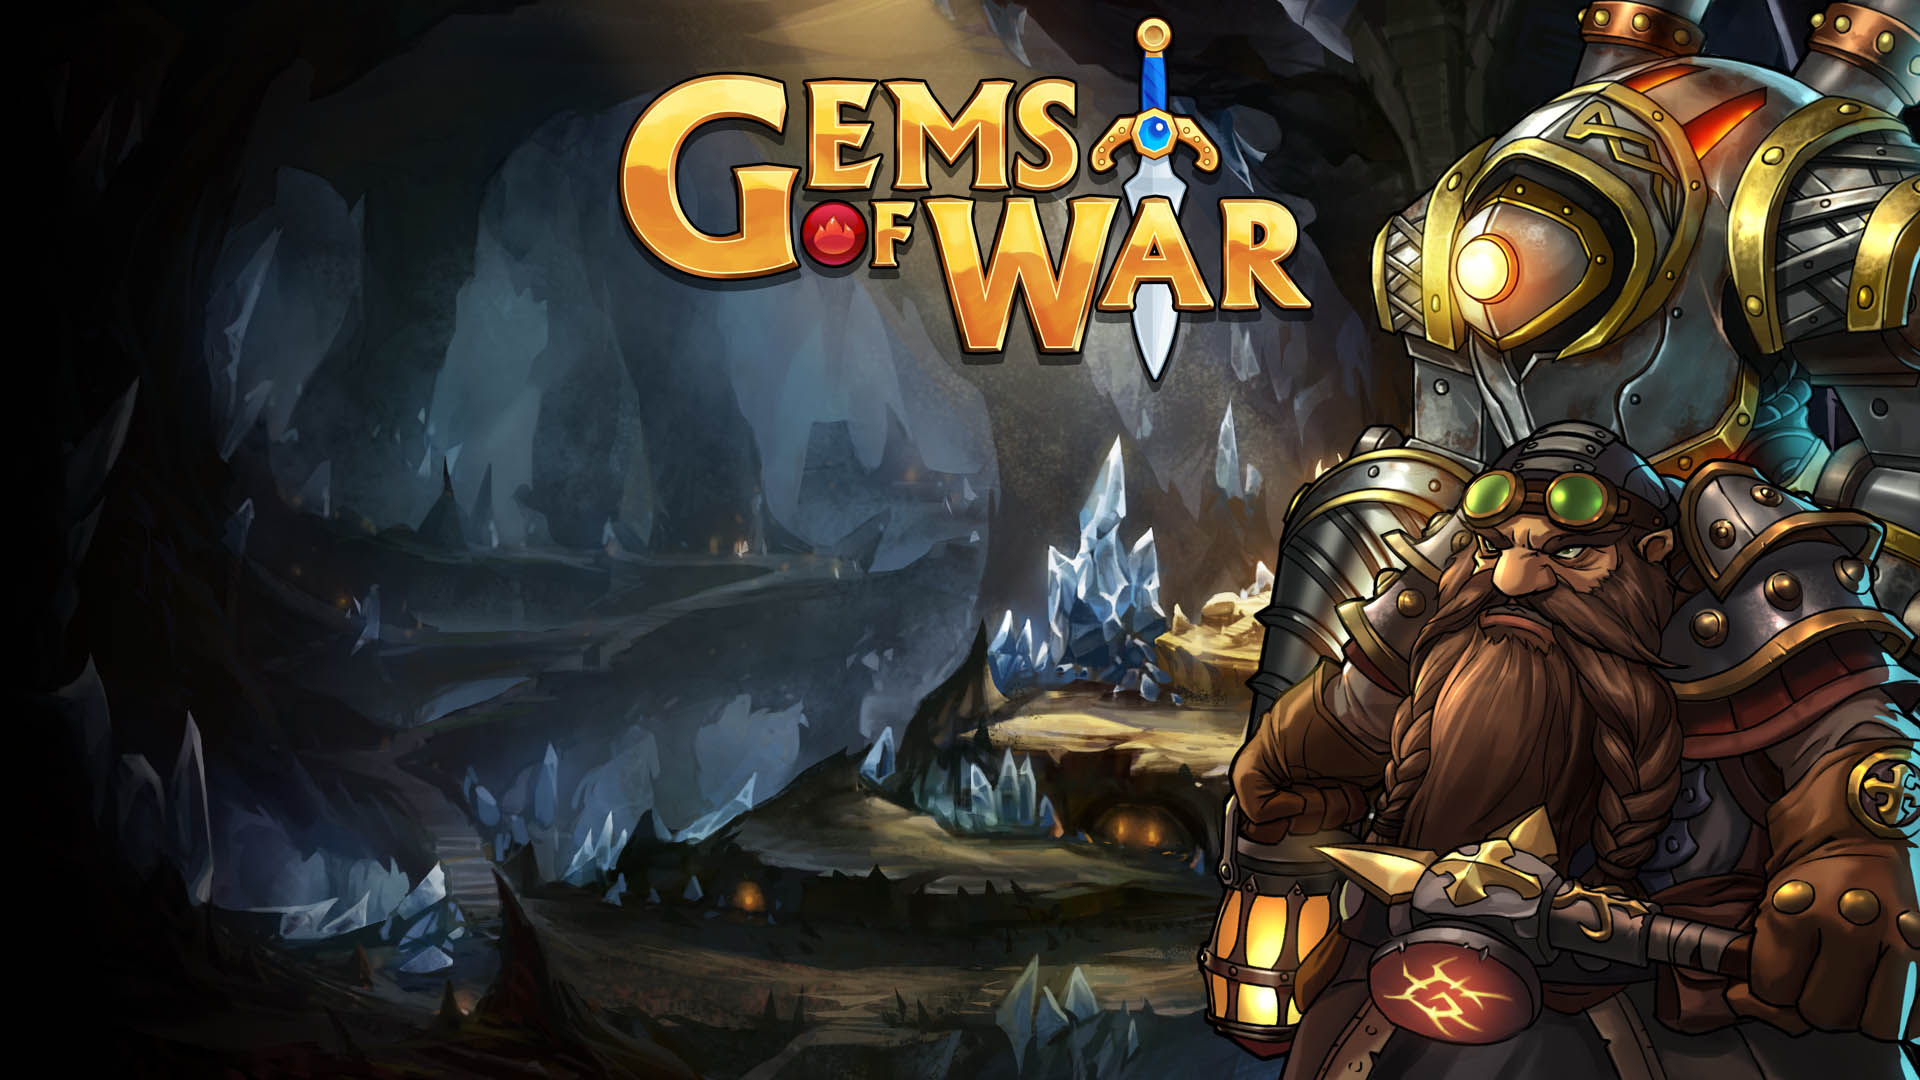 Gems Of War Backgrounds, Compatible - PC, Mobile, Gadgets| 1920x1080 px